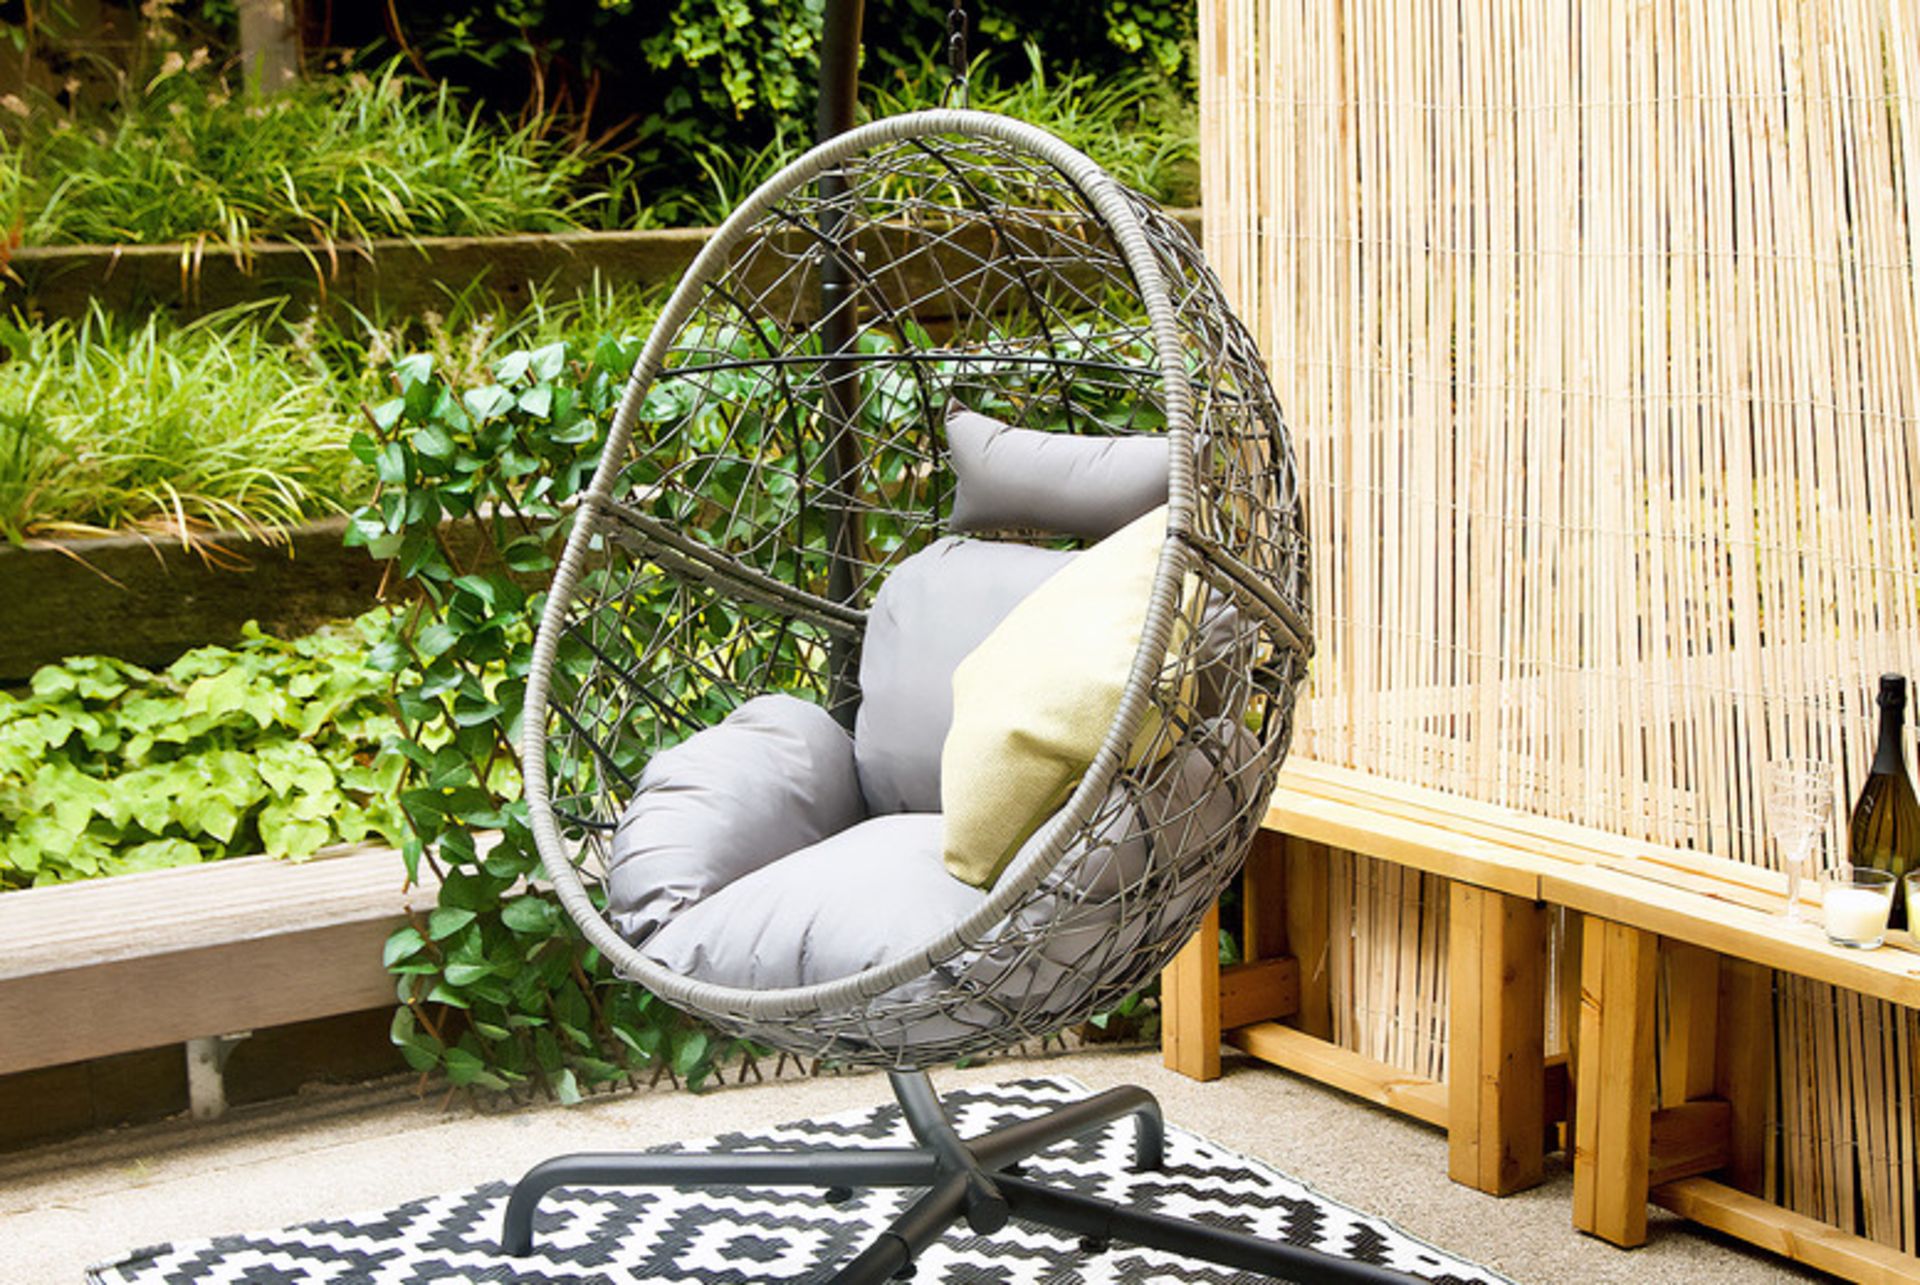 5 X NEW RATTAN HANGING EGG CHAIR WITH A CUSHION AND PILLOW - GREY